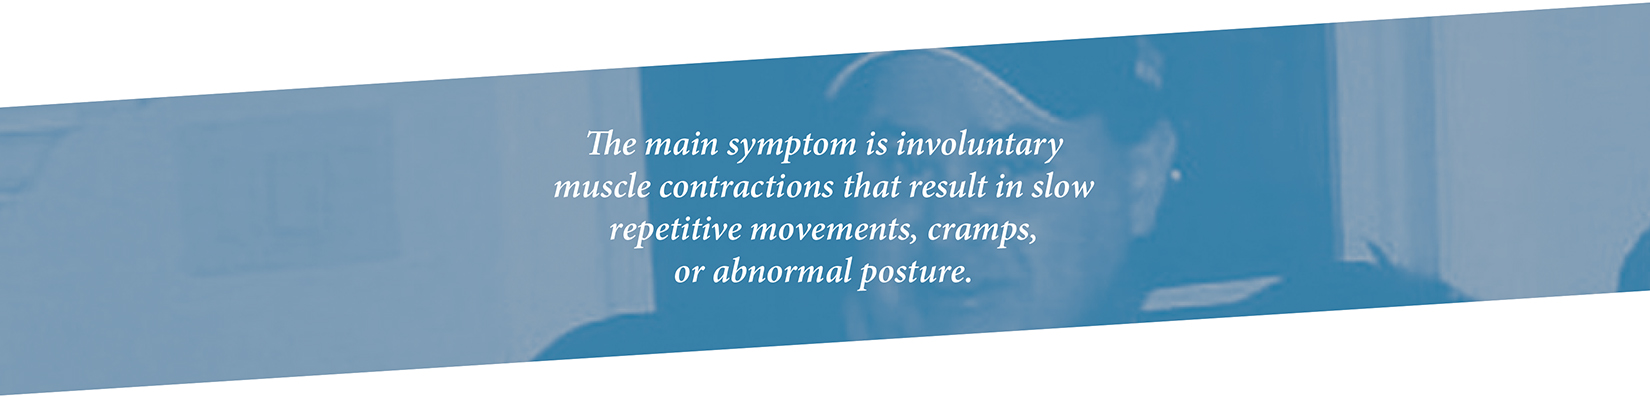 The main symptom is involuntary muscle contractions that result in slow repetitive movements, cramps, or abnormal posture.